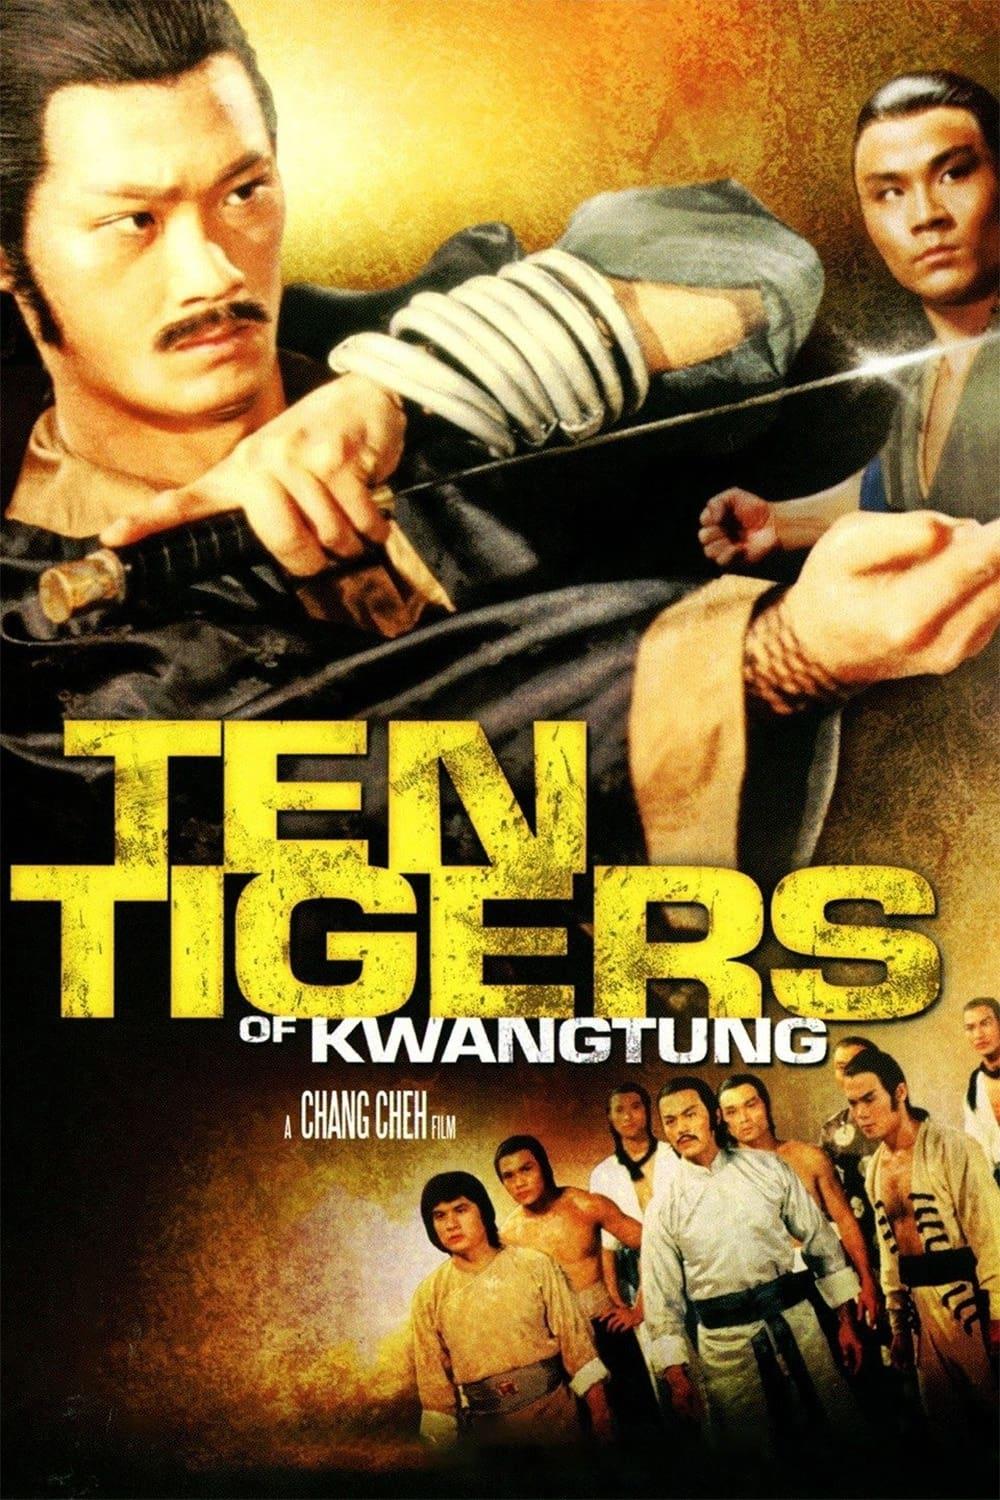 Ten Tigers of Kwangtung poster